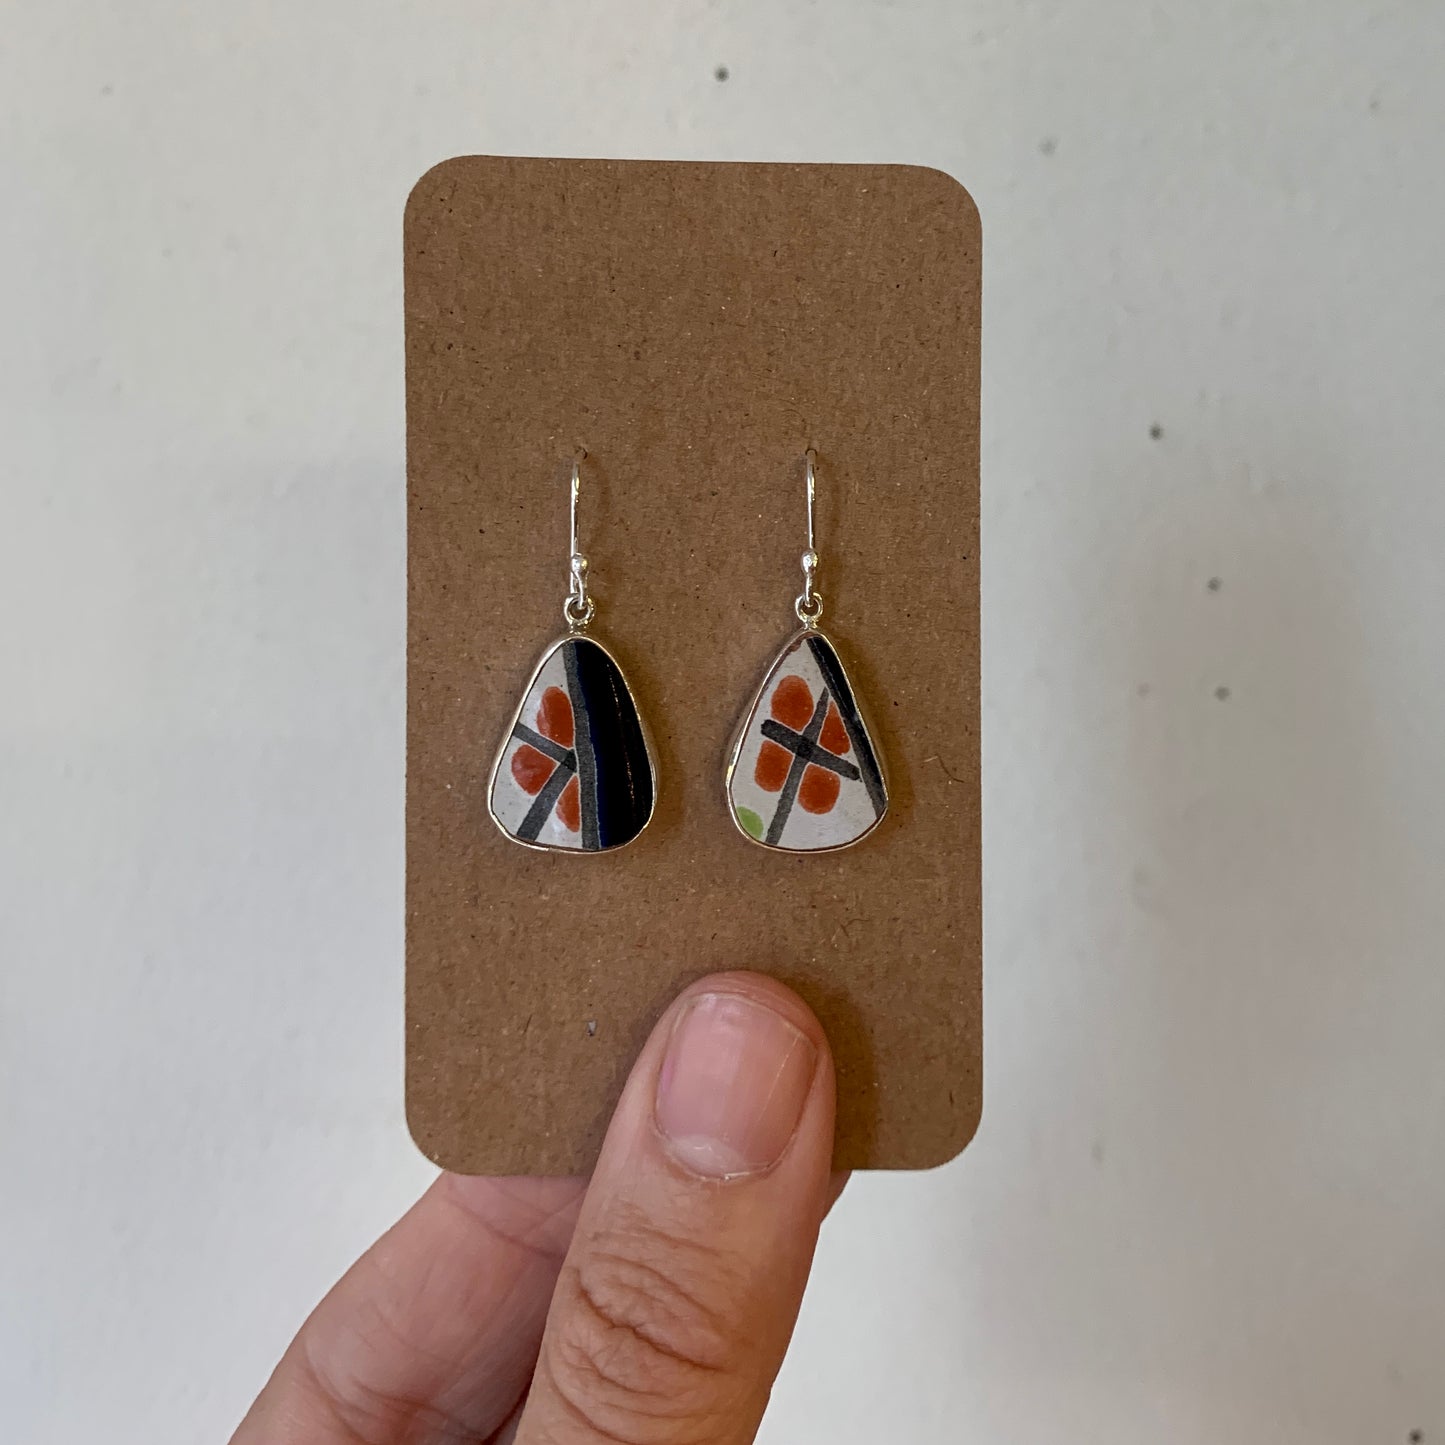 Earrings with a Story #7